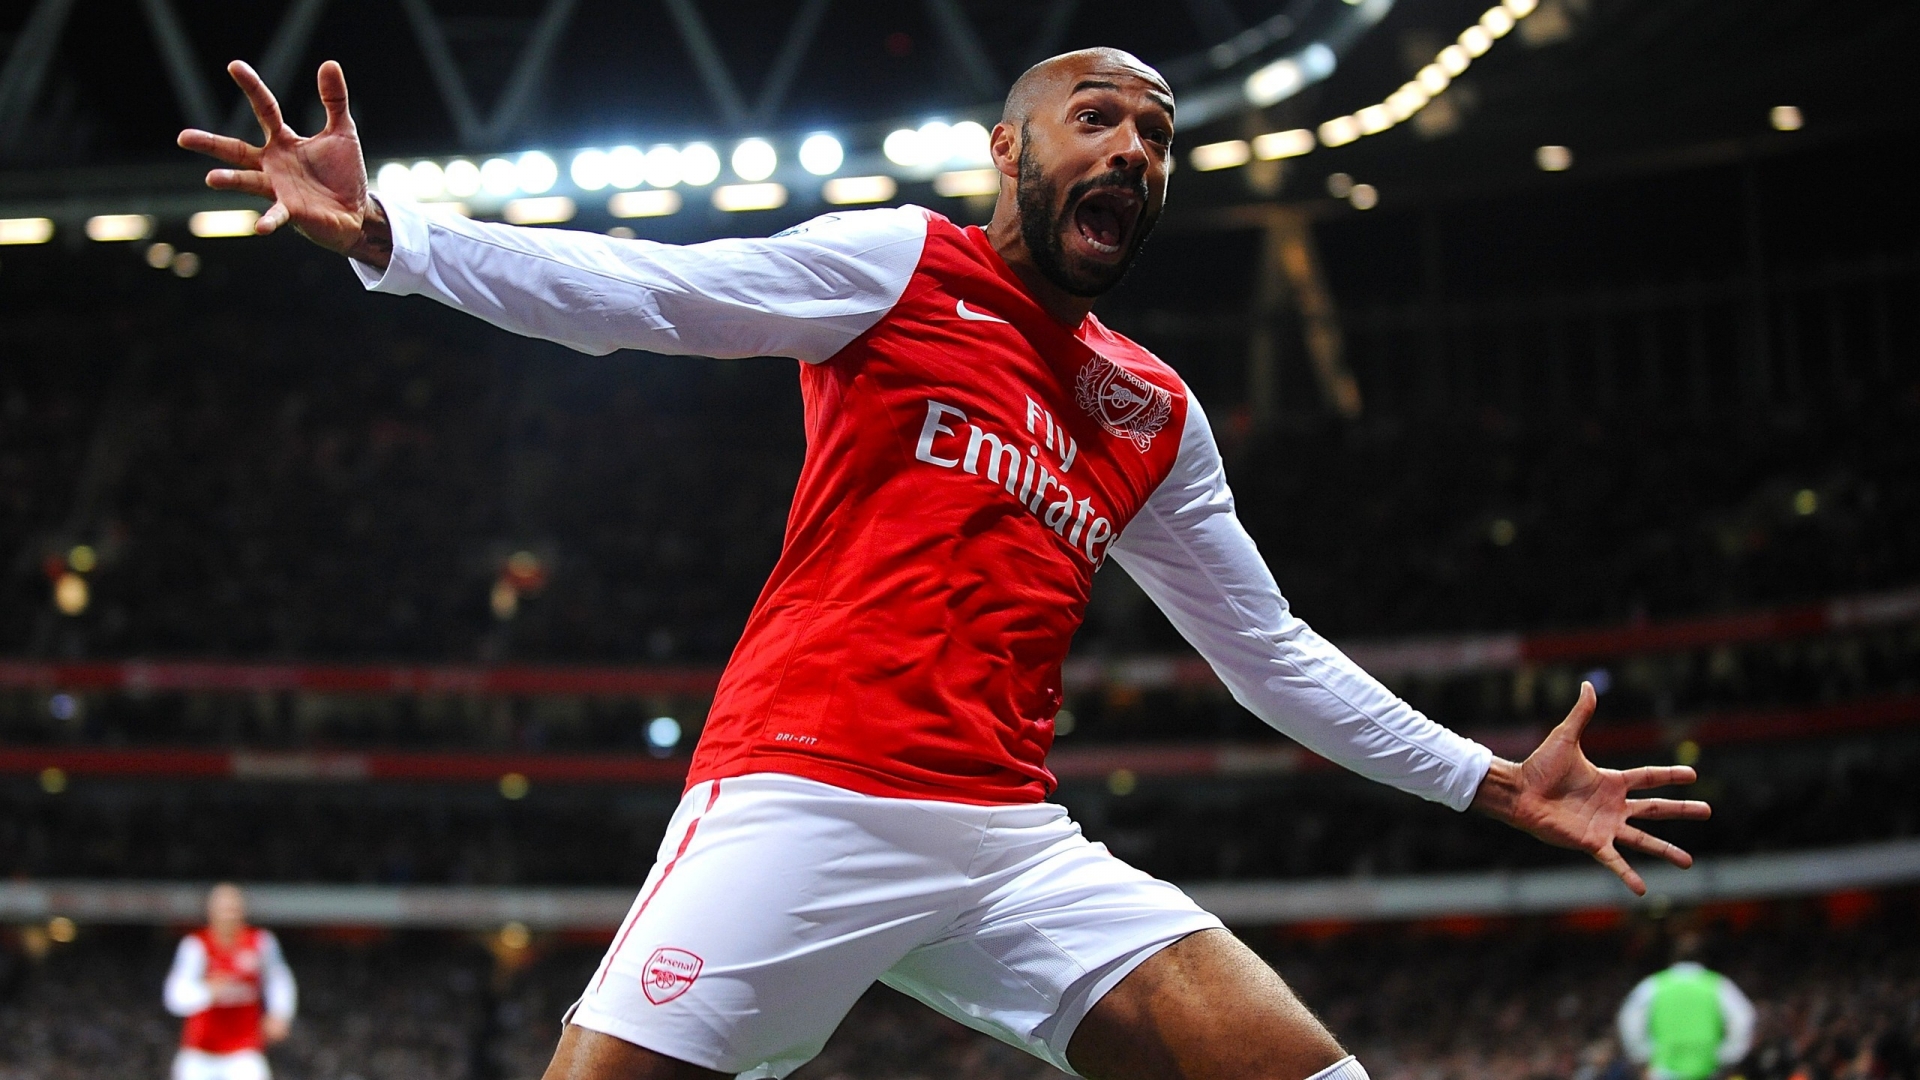 Thierry Henry Arsenal for 1920 x 1080 HDTV 1080p resolution